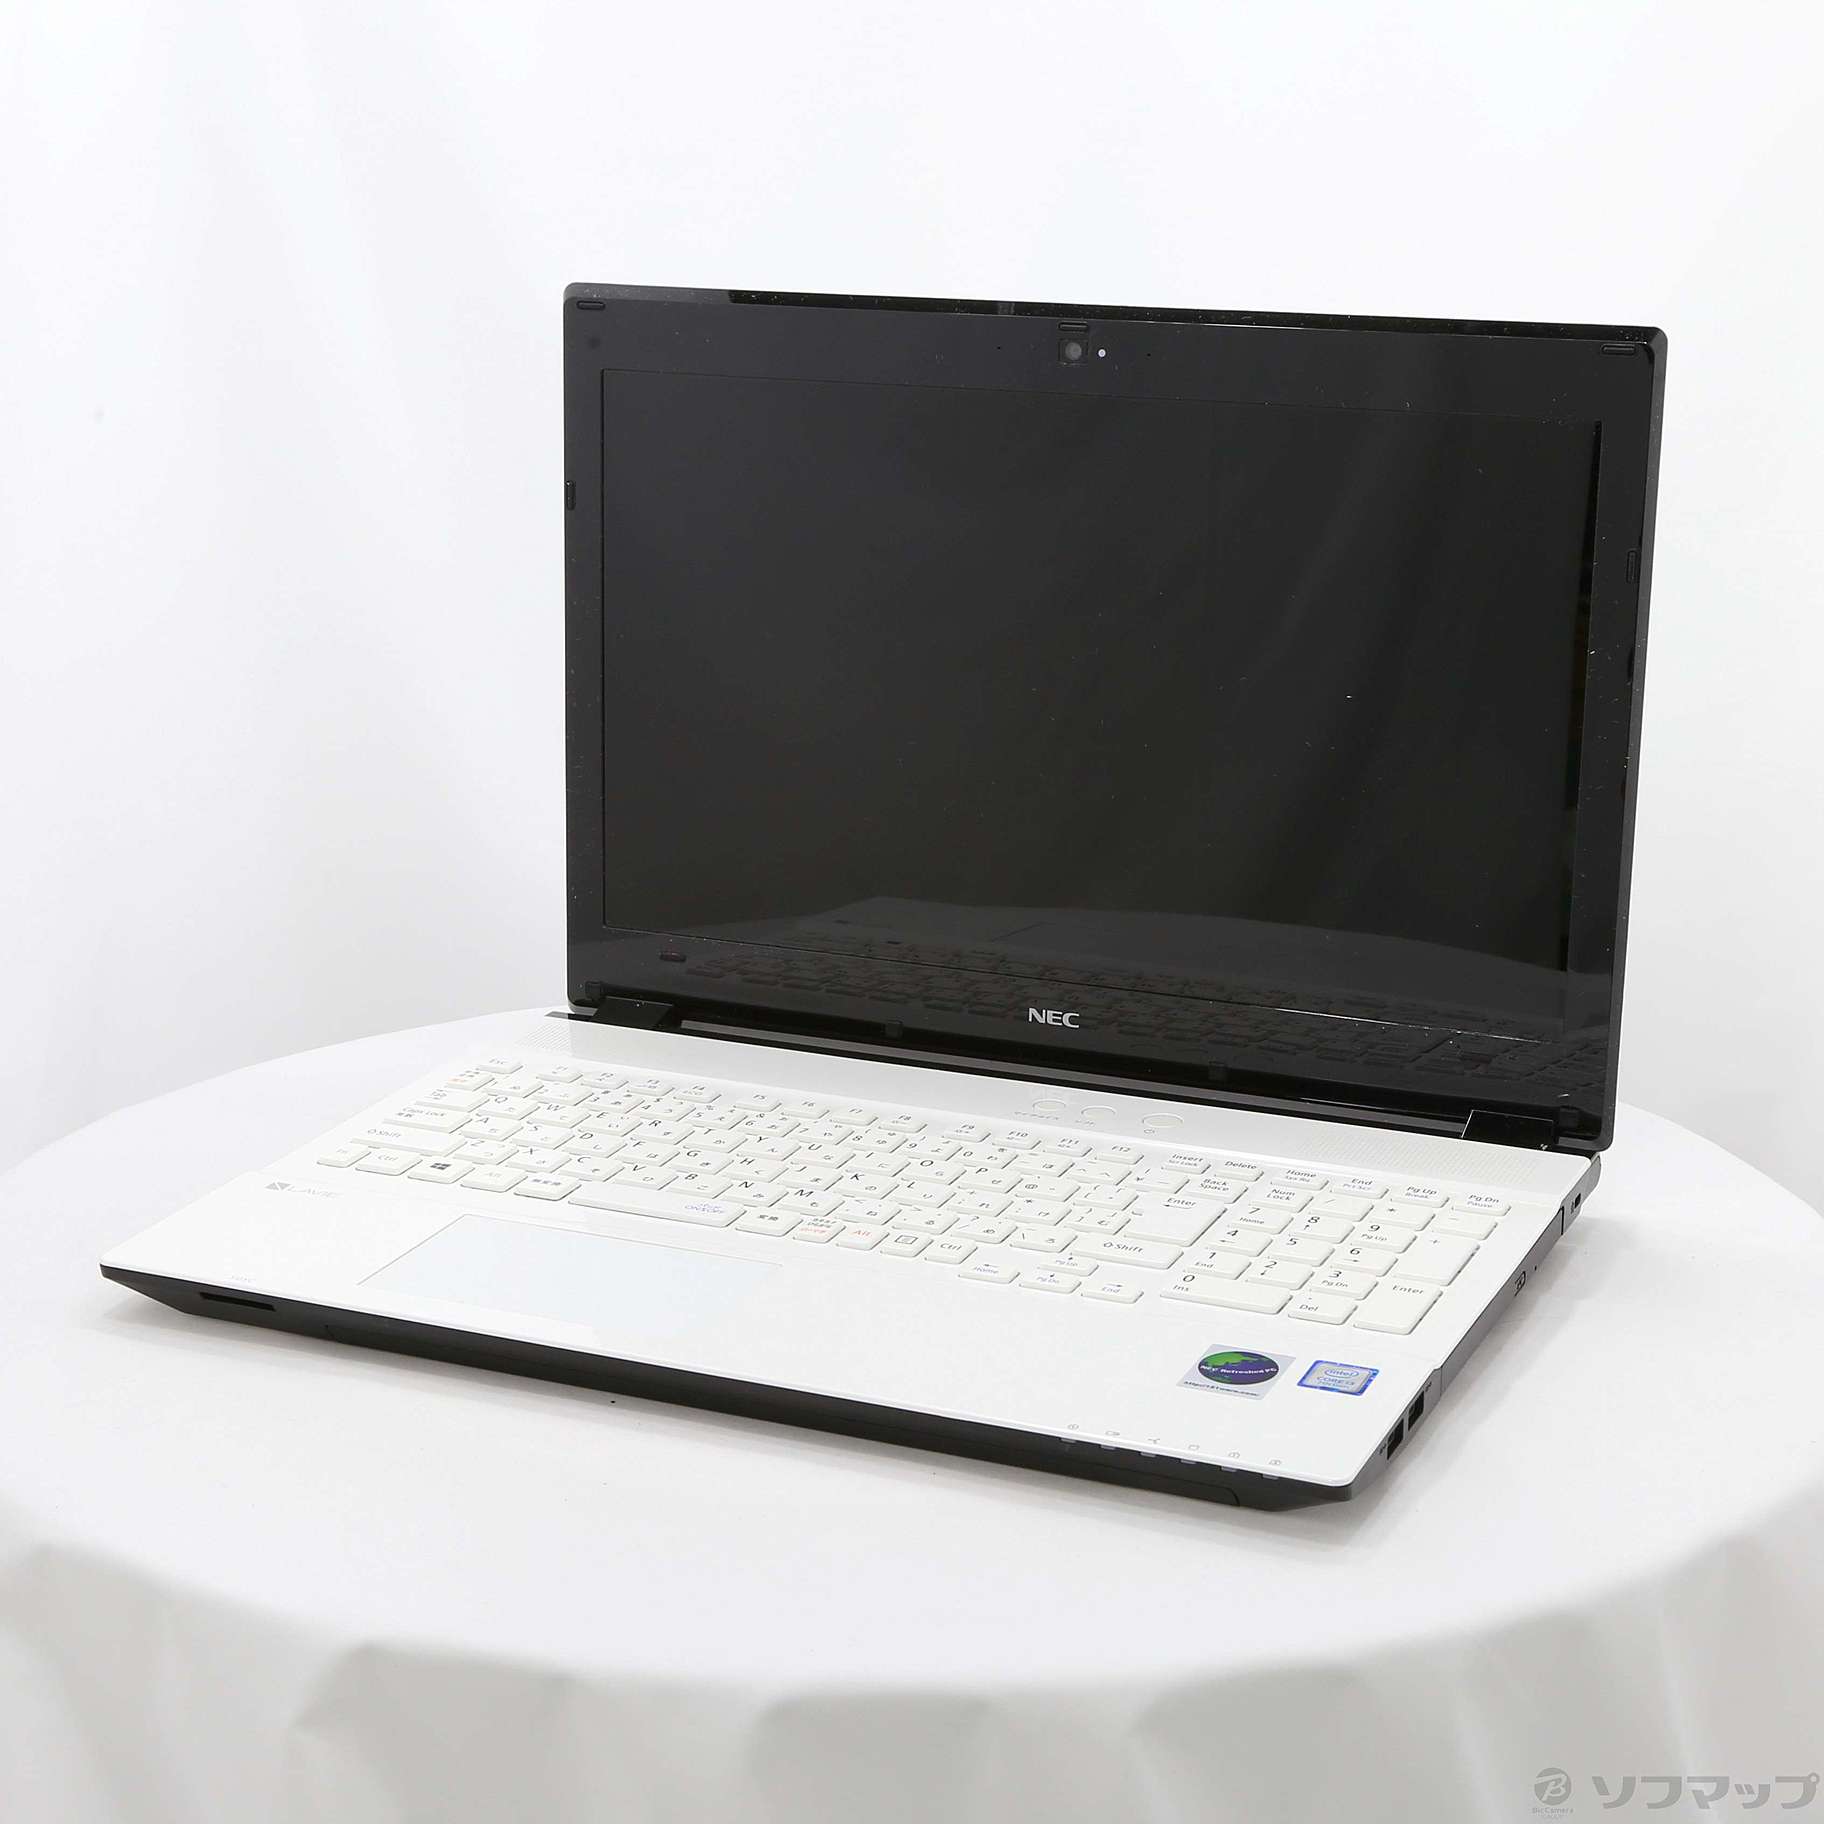 LAVIE Direct NS PC-GN242FRAB 〔NEC Refreshed PC〕 〔Windows 10〕 ≪メーカー保証あり≫